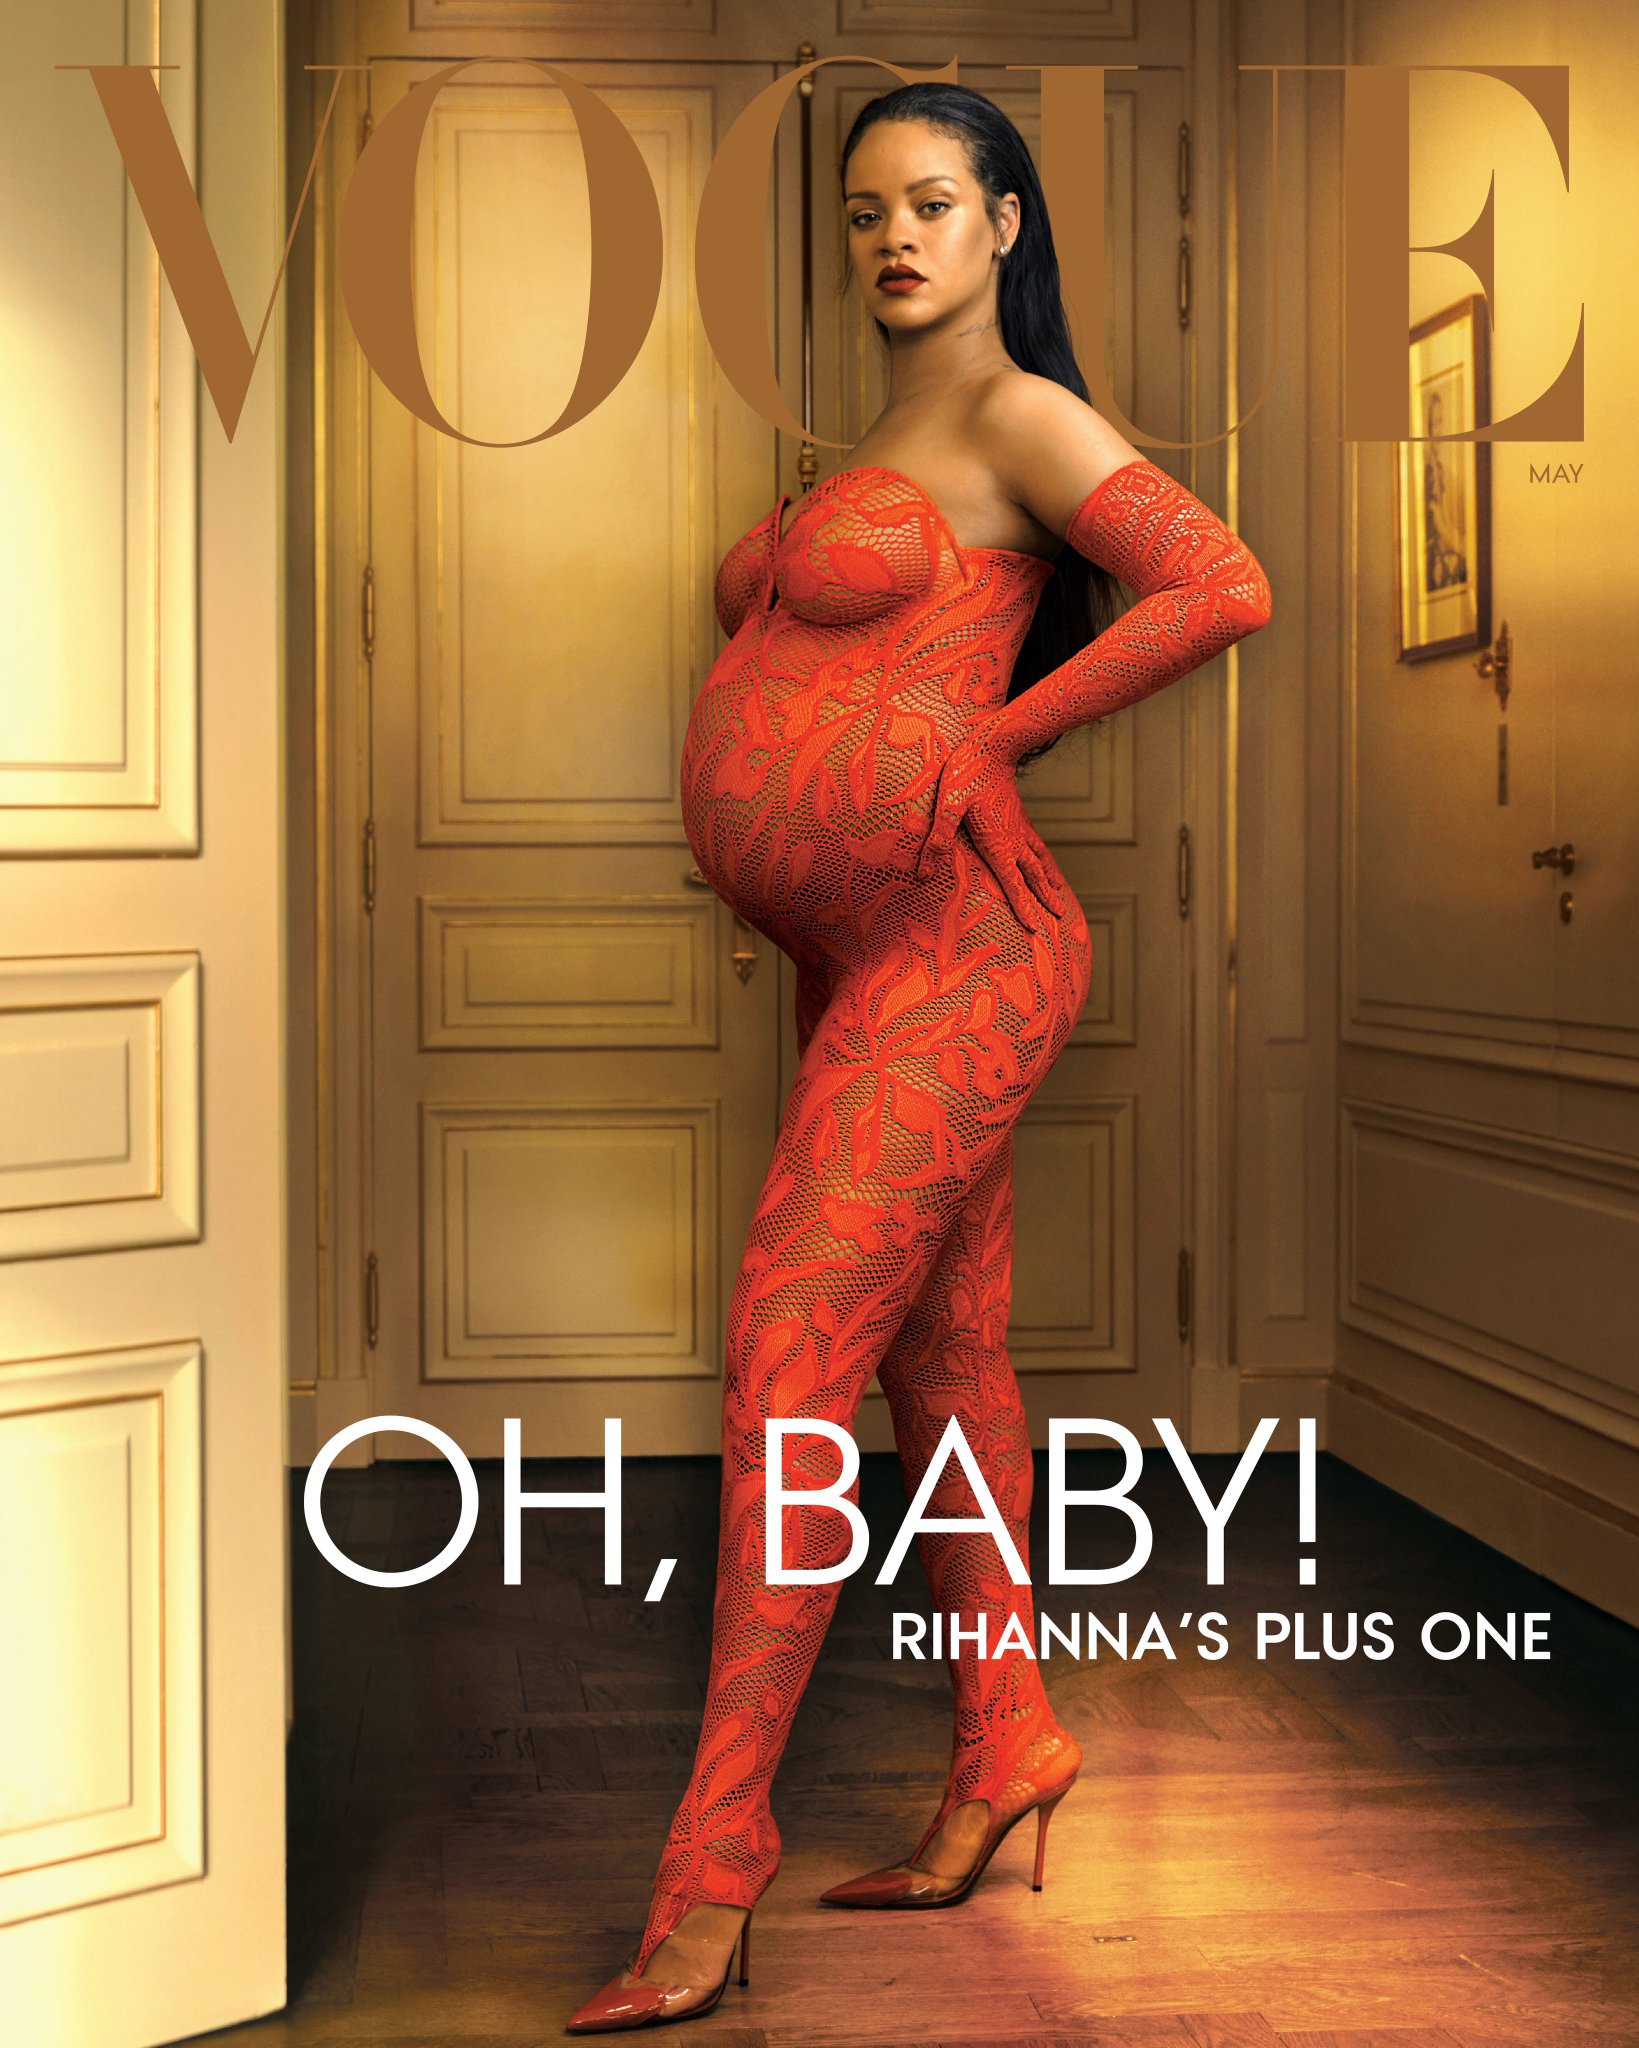 Rihanna Covers The May Issue Of ‘Vogue’